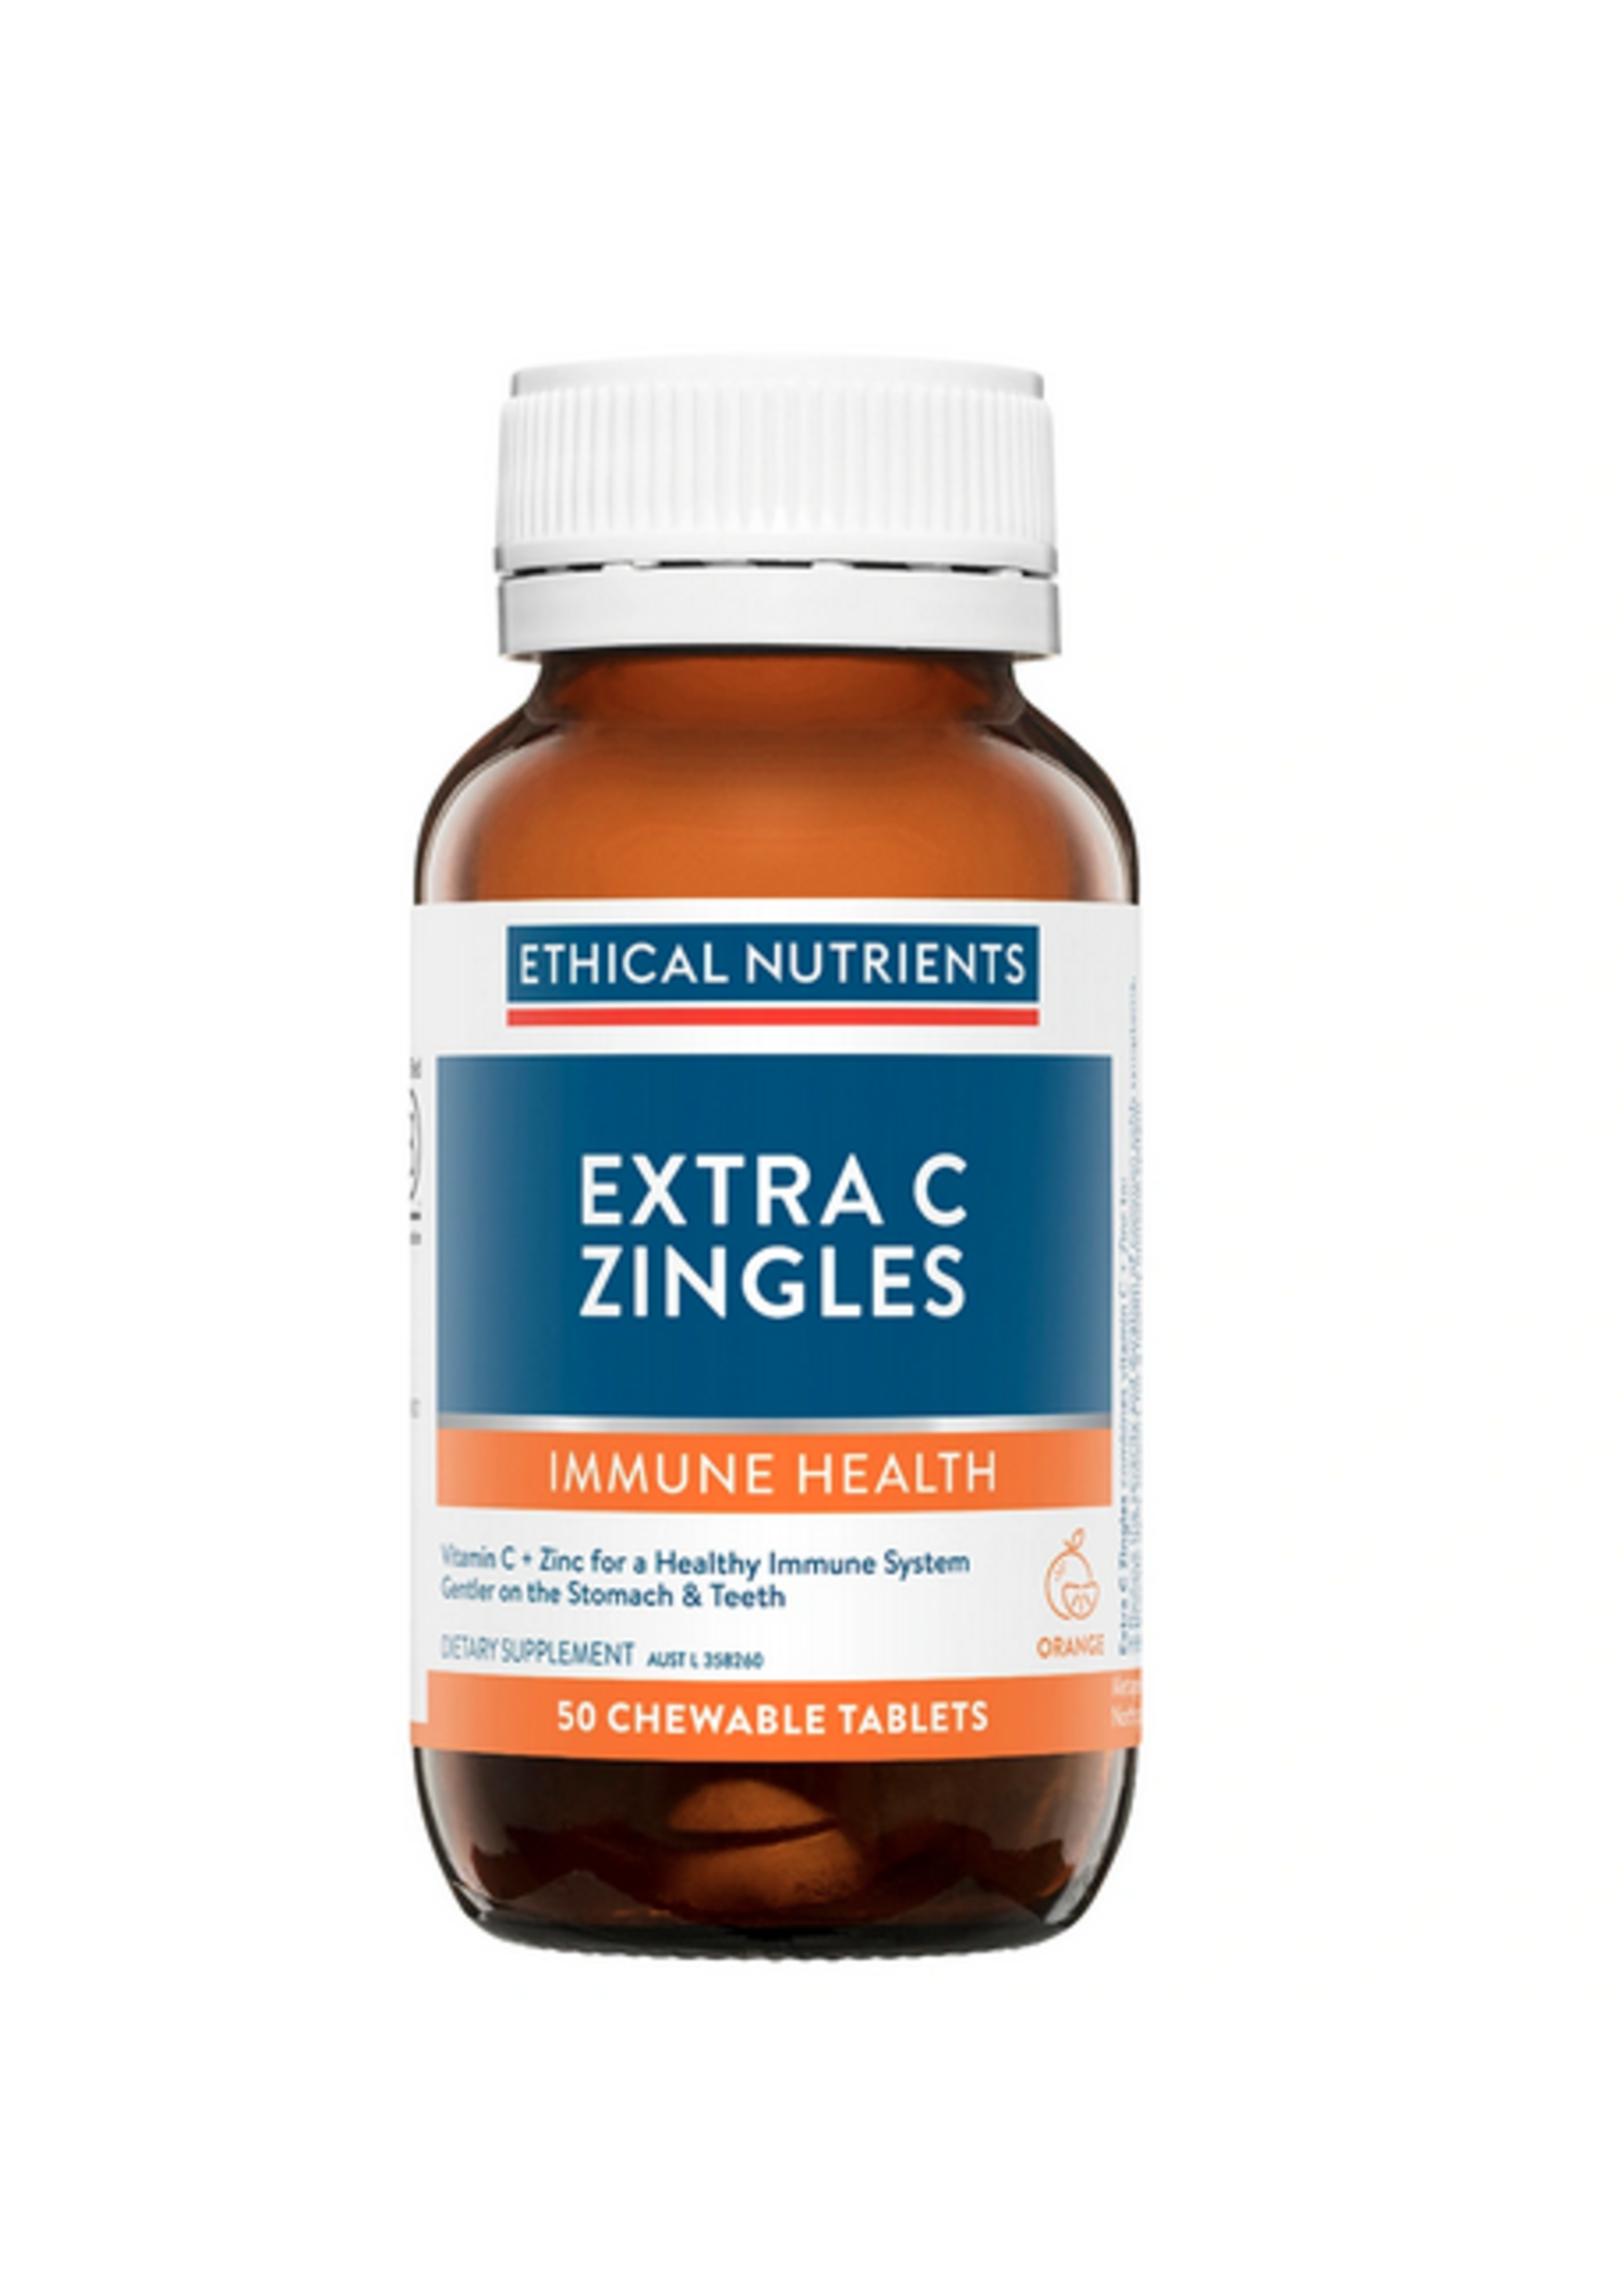 ETHICAL NUTRIENTS Ethical Nutrients Extra C 1000 mg Zingles  Orange 50 chewable tabs immuzorb